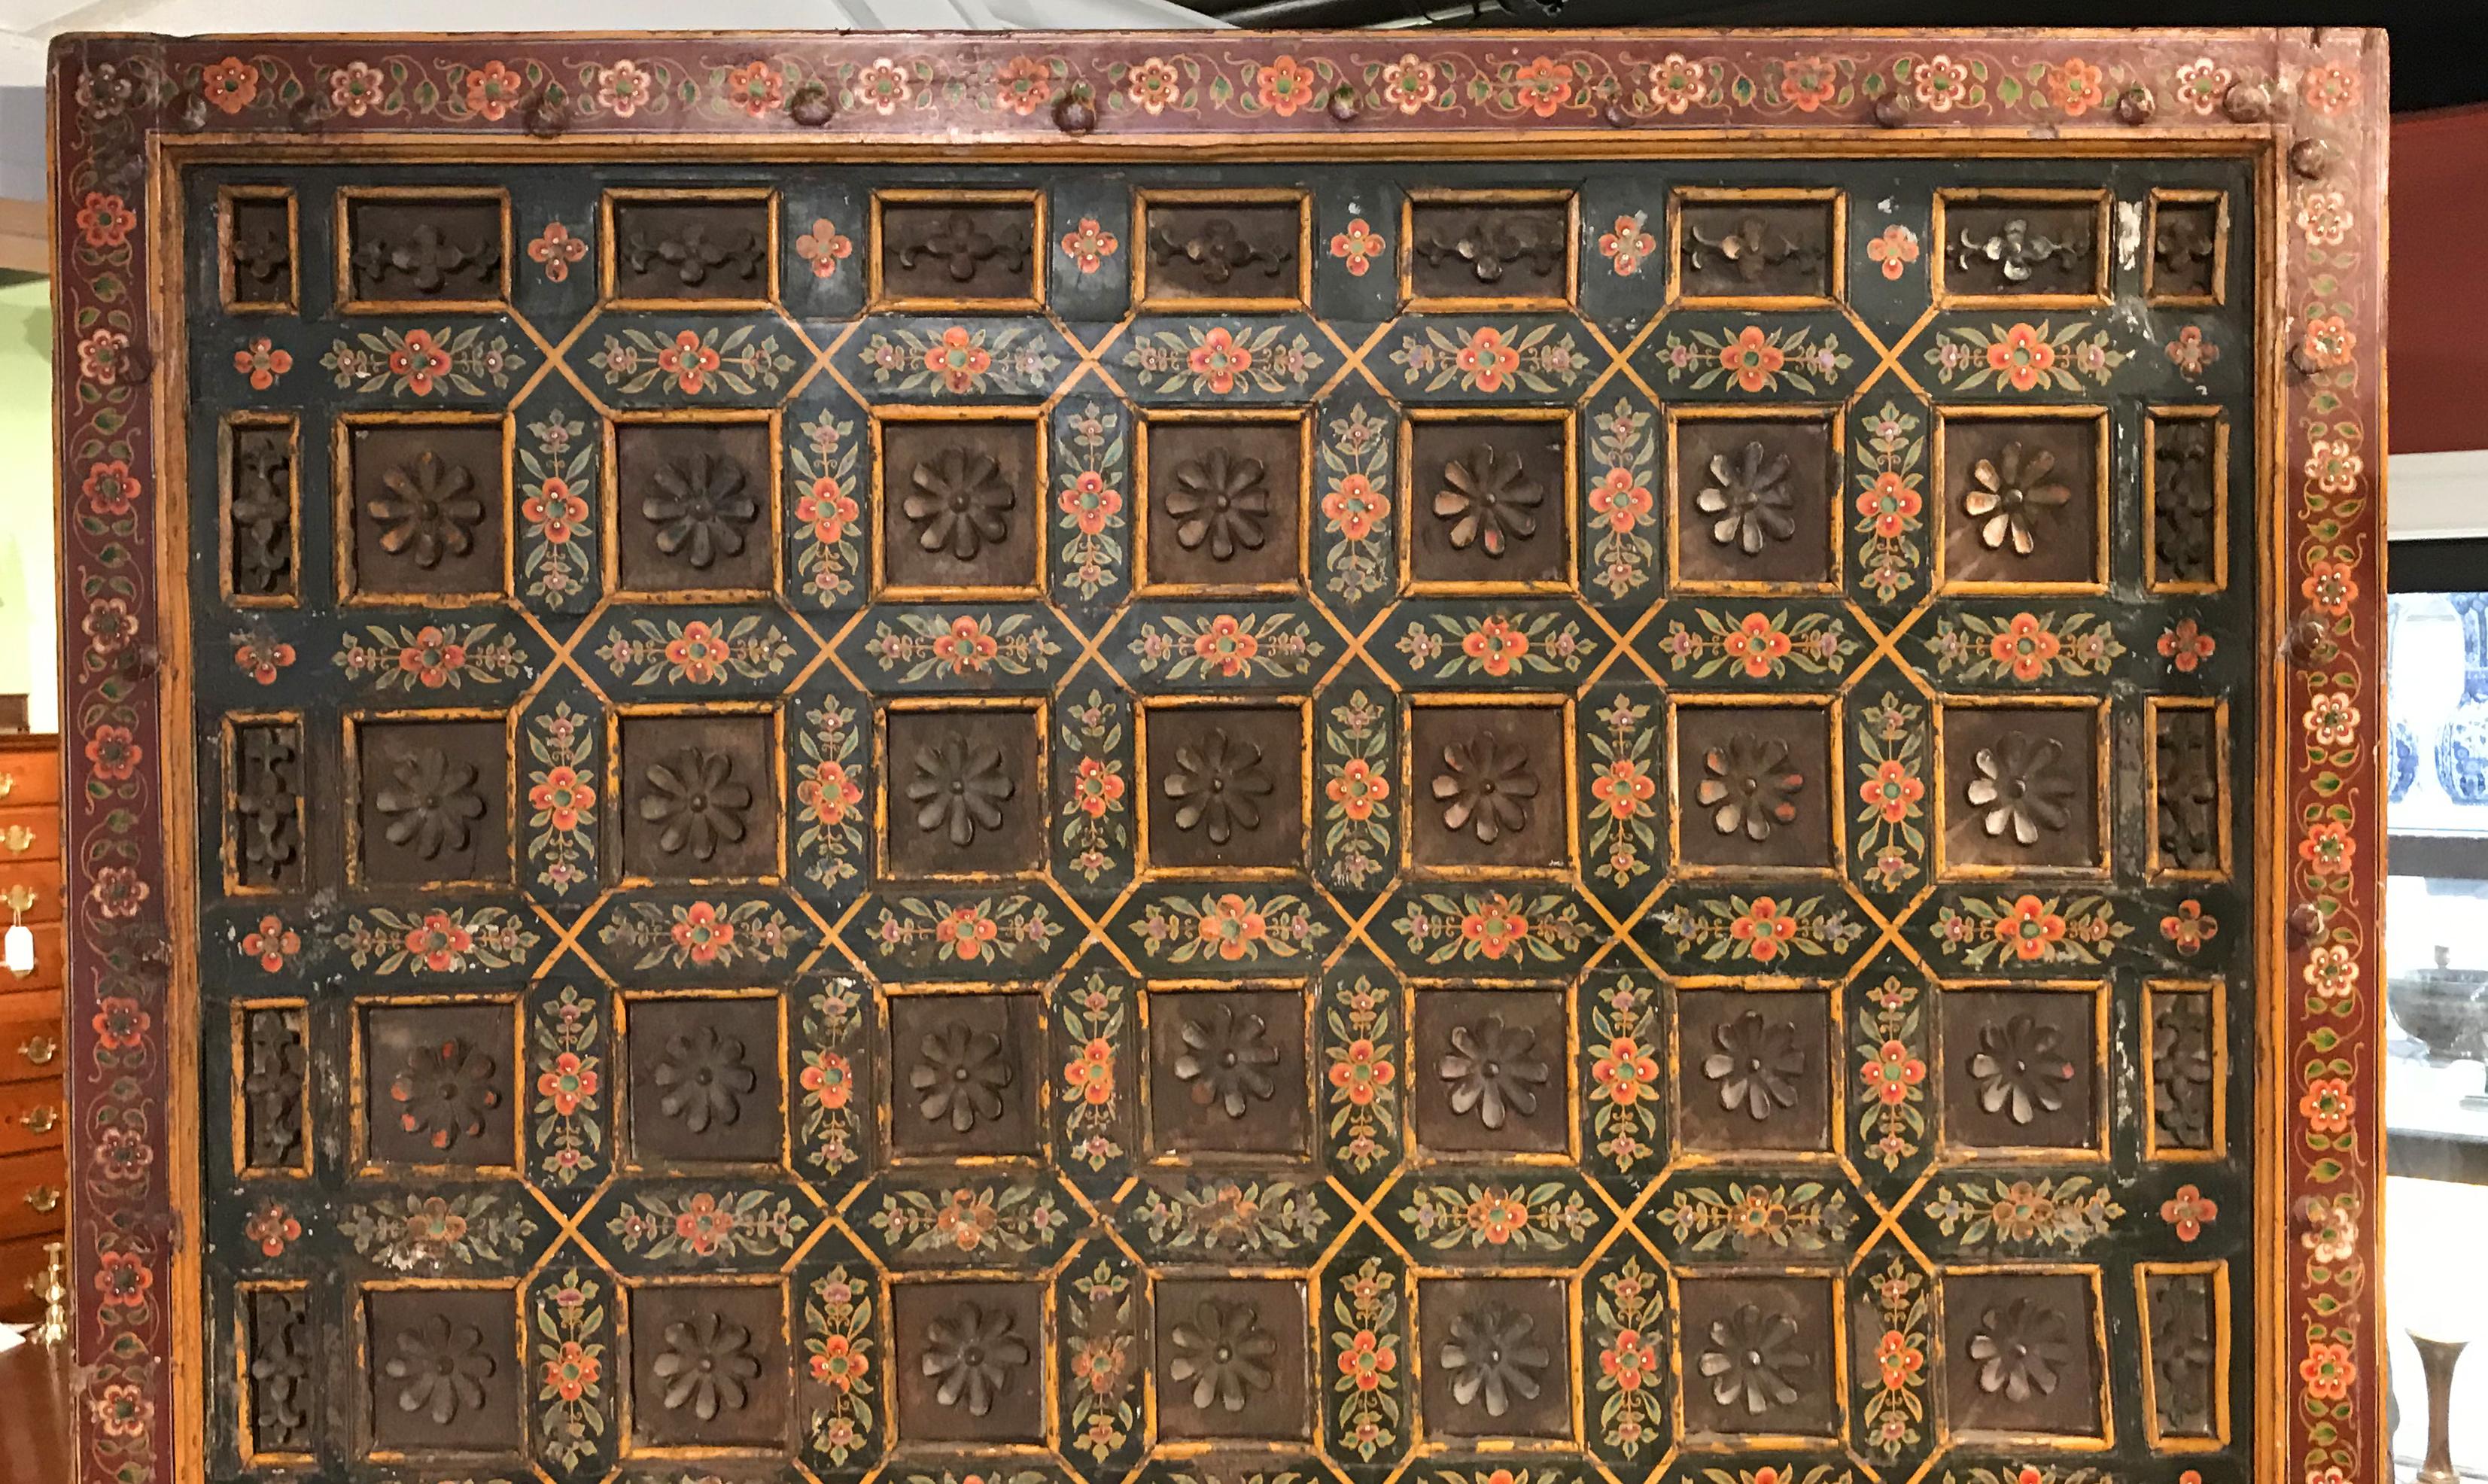 A fine example of an Indian polychrome carved wooden architectural element, most likely a ceiling panel, with repeating blocks with lotus blossom motif, accented by painted flowers in red and green, complimented by a red border with yellow